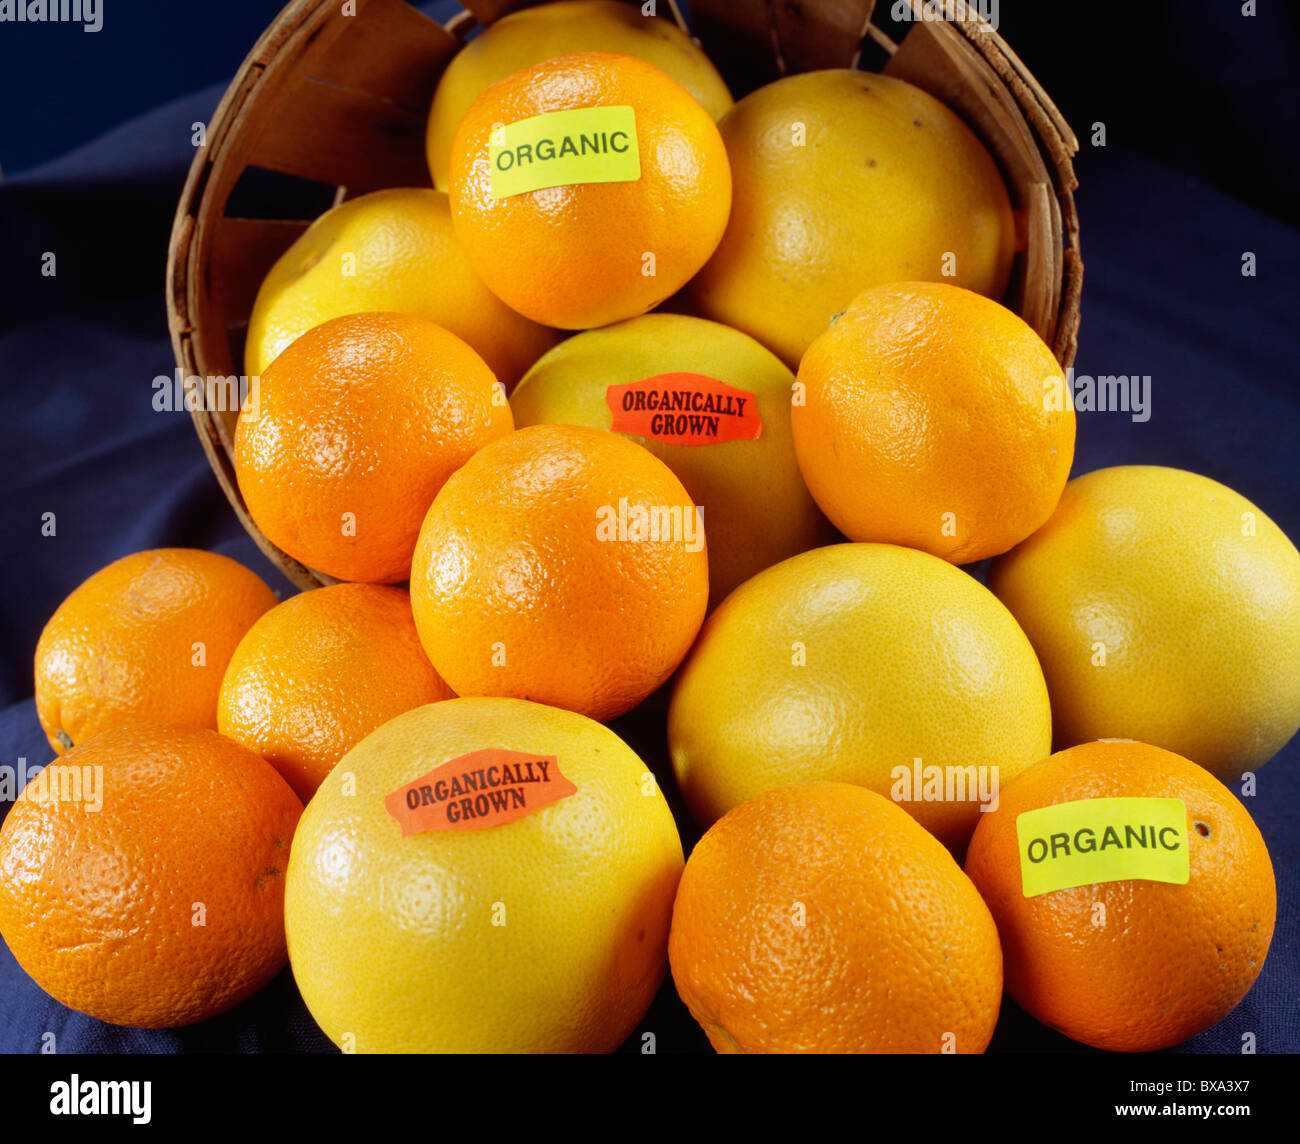 ORGANICALLY GROWN CITRUS FRUIT: GRAPEFRUIT AND ORANGES.  ORGANICALLY GROWN IN CALIFORNIA. SHOWS ORGANICALLY GROWN LABELS Stock Photo